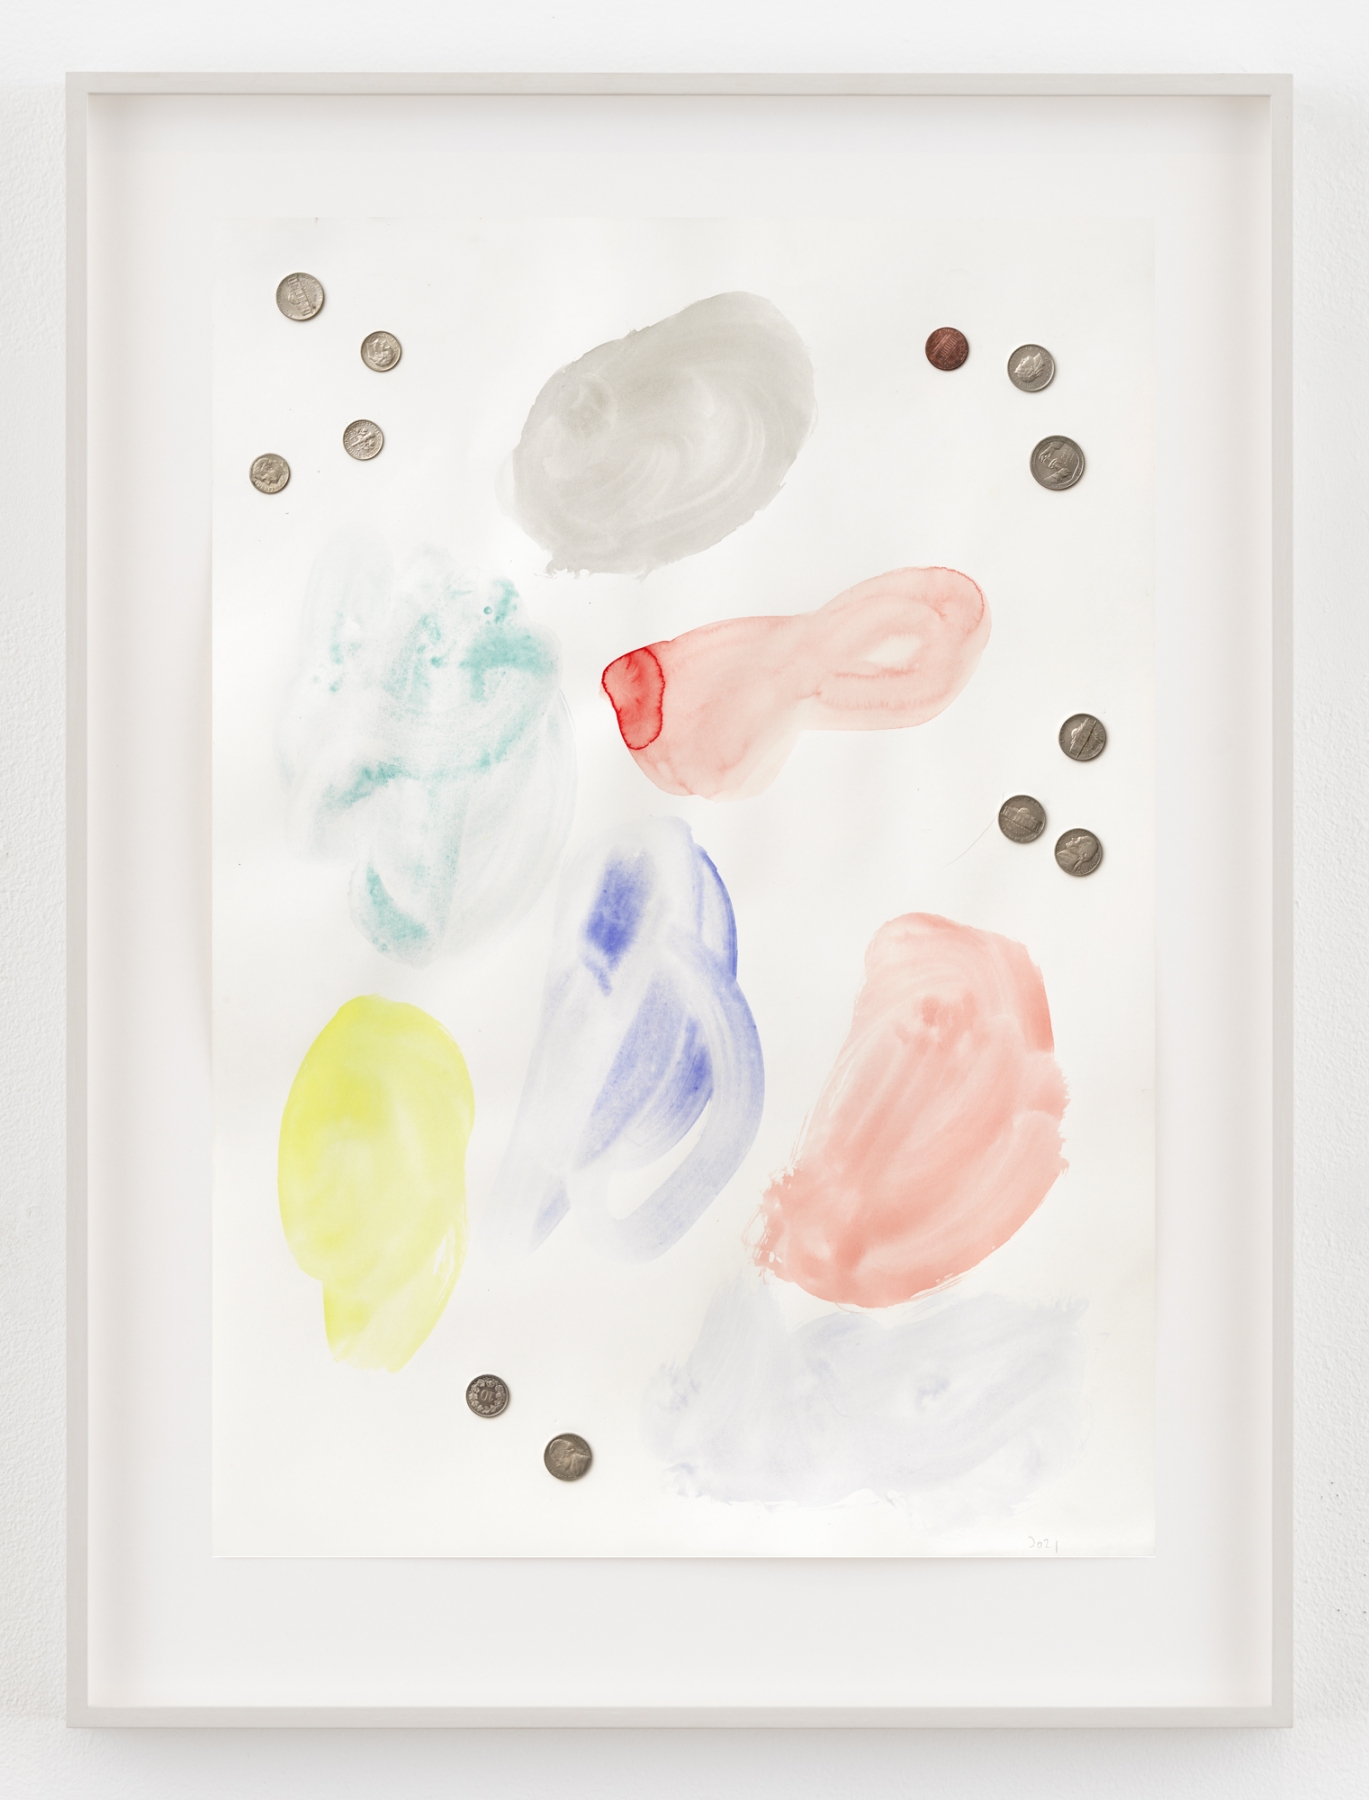 Monika Baer
Insult to the Eye, 2021
Watercolor and coins on paper
Paper: 23 1/2 x 16 1/2 inches (59.7 x 41.9 cm)
Frame: 29 1/4 x 21 3/4 x 1 3/8 inches (74.3 x 55.2 x 3.5 cm)